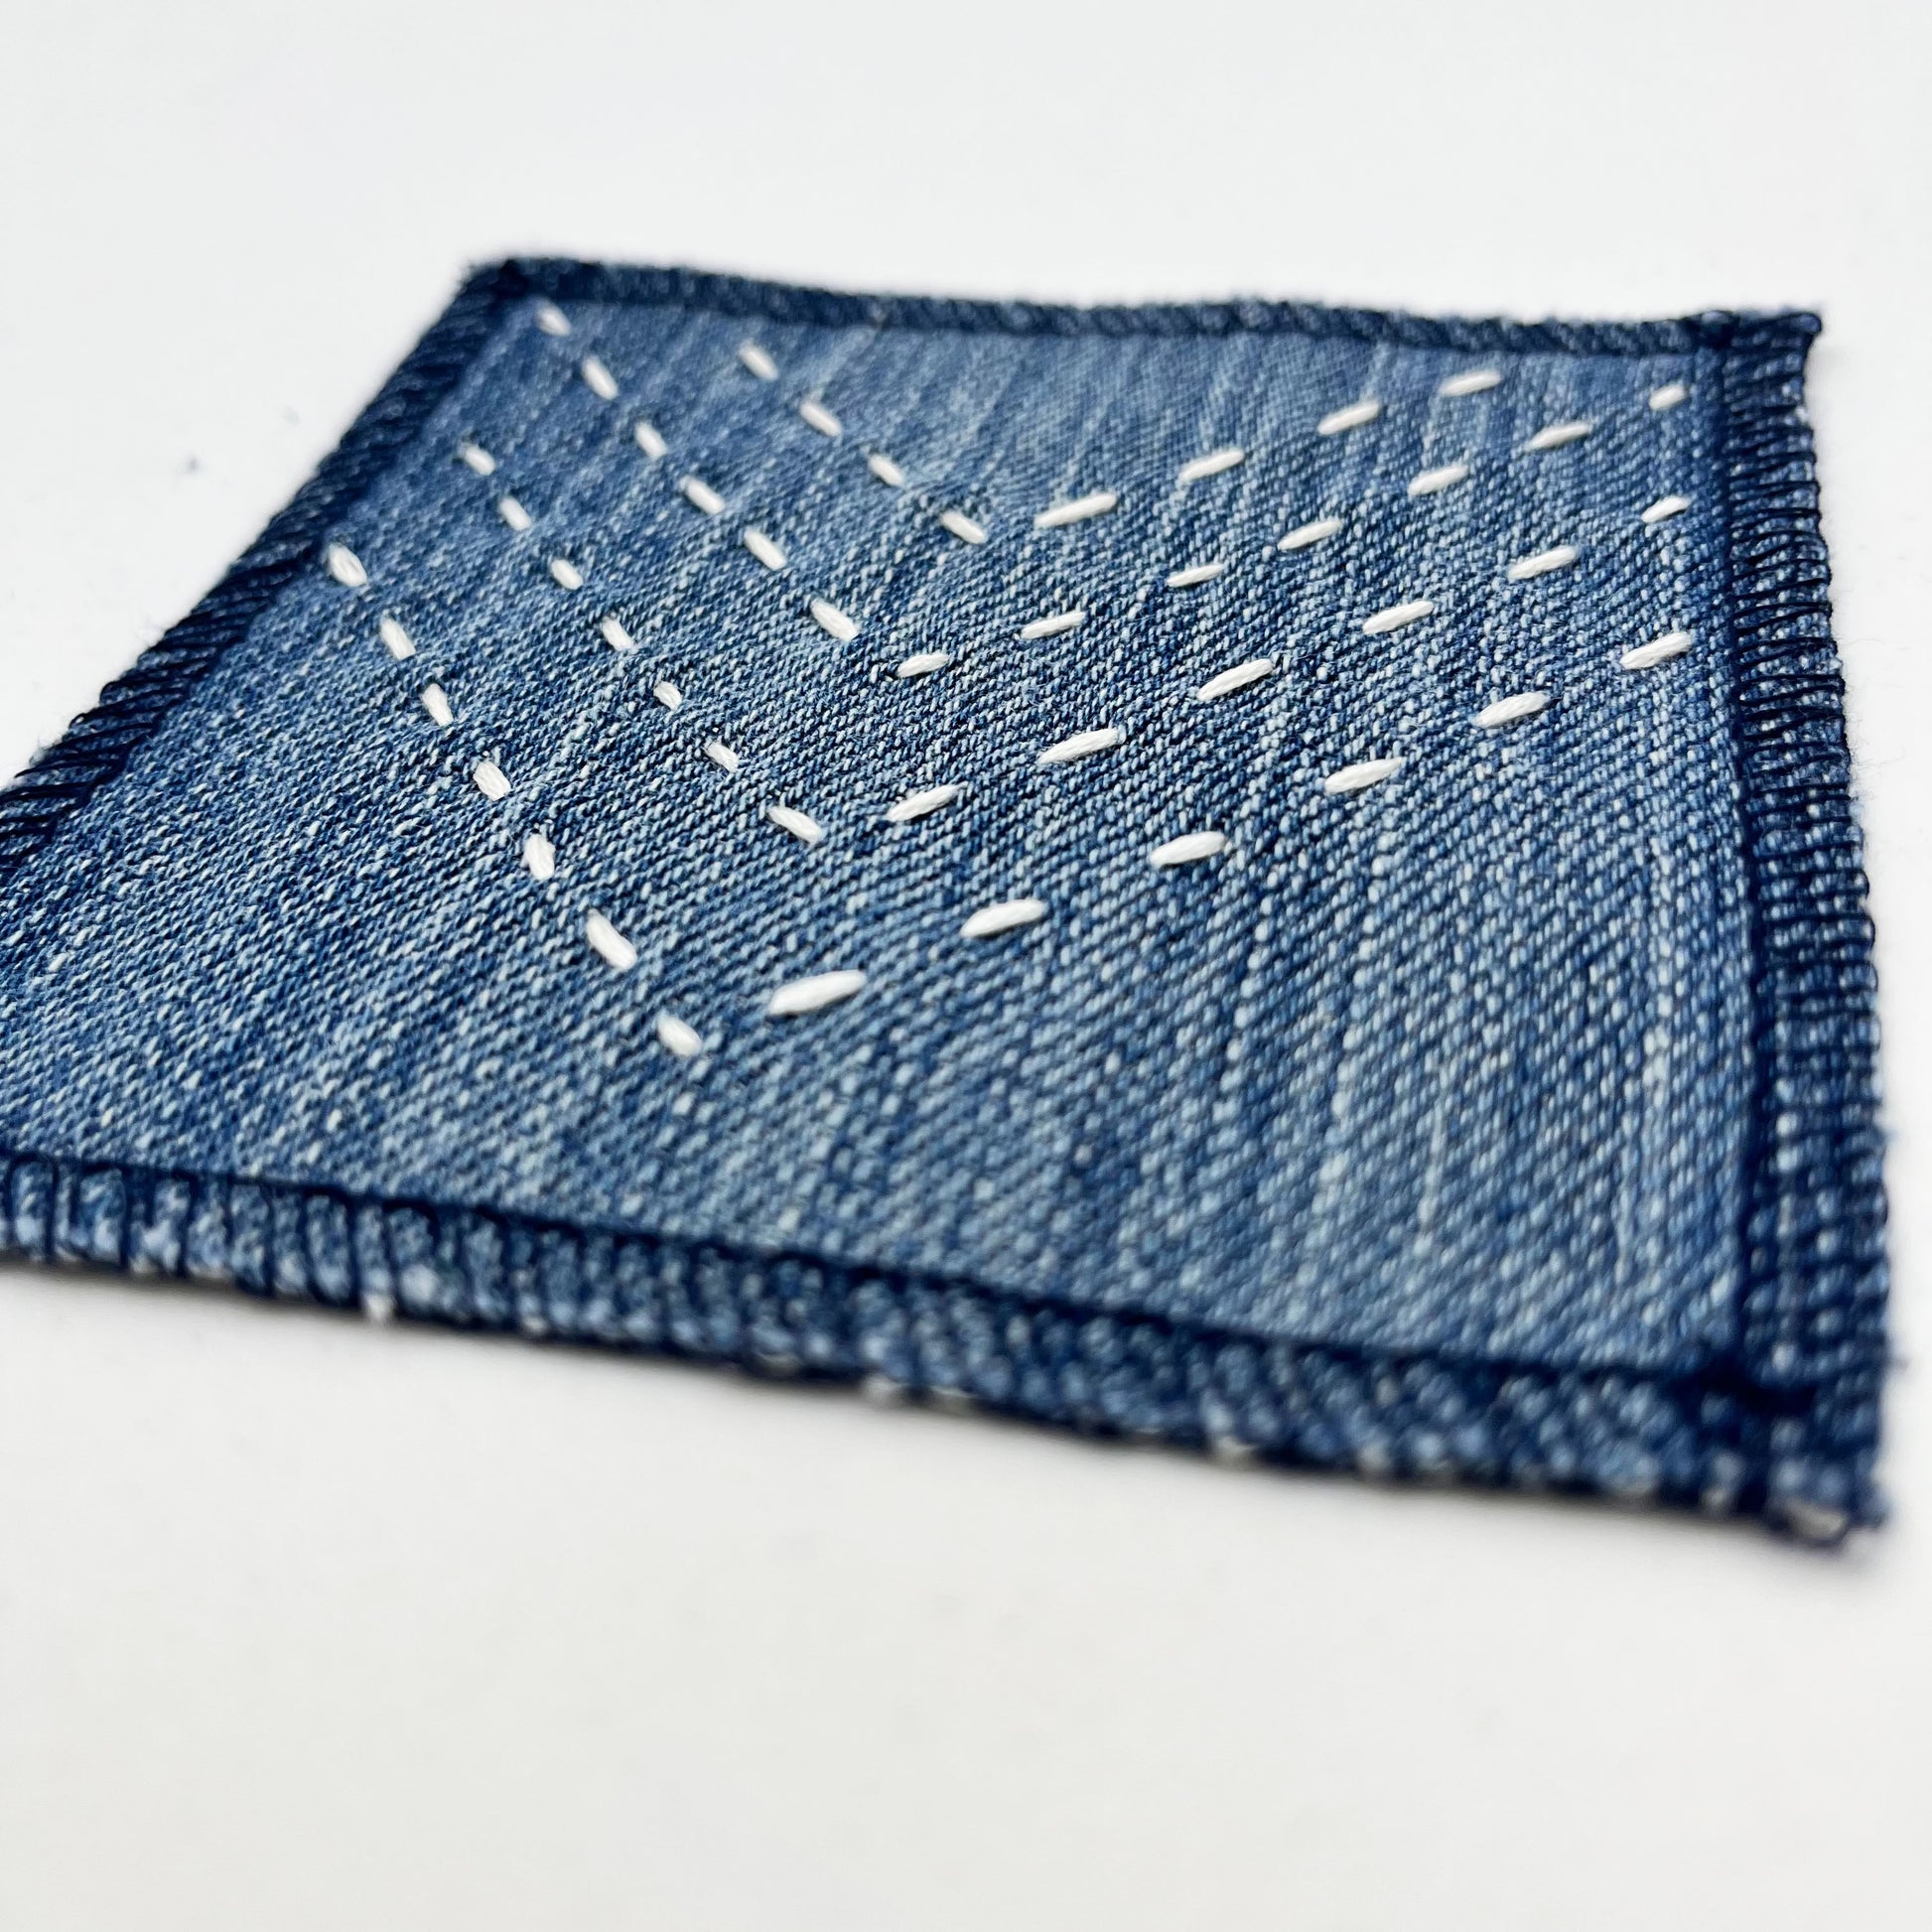 a close up angled view of a square patch made out of denim, handstitched with rows of ivory running stitches in a chevron pattern, with overlocked edges, on a white background